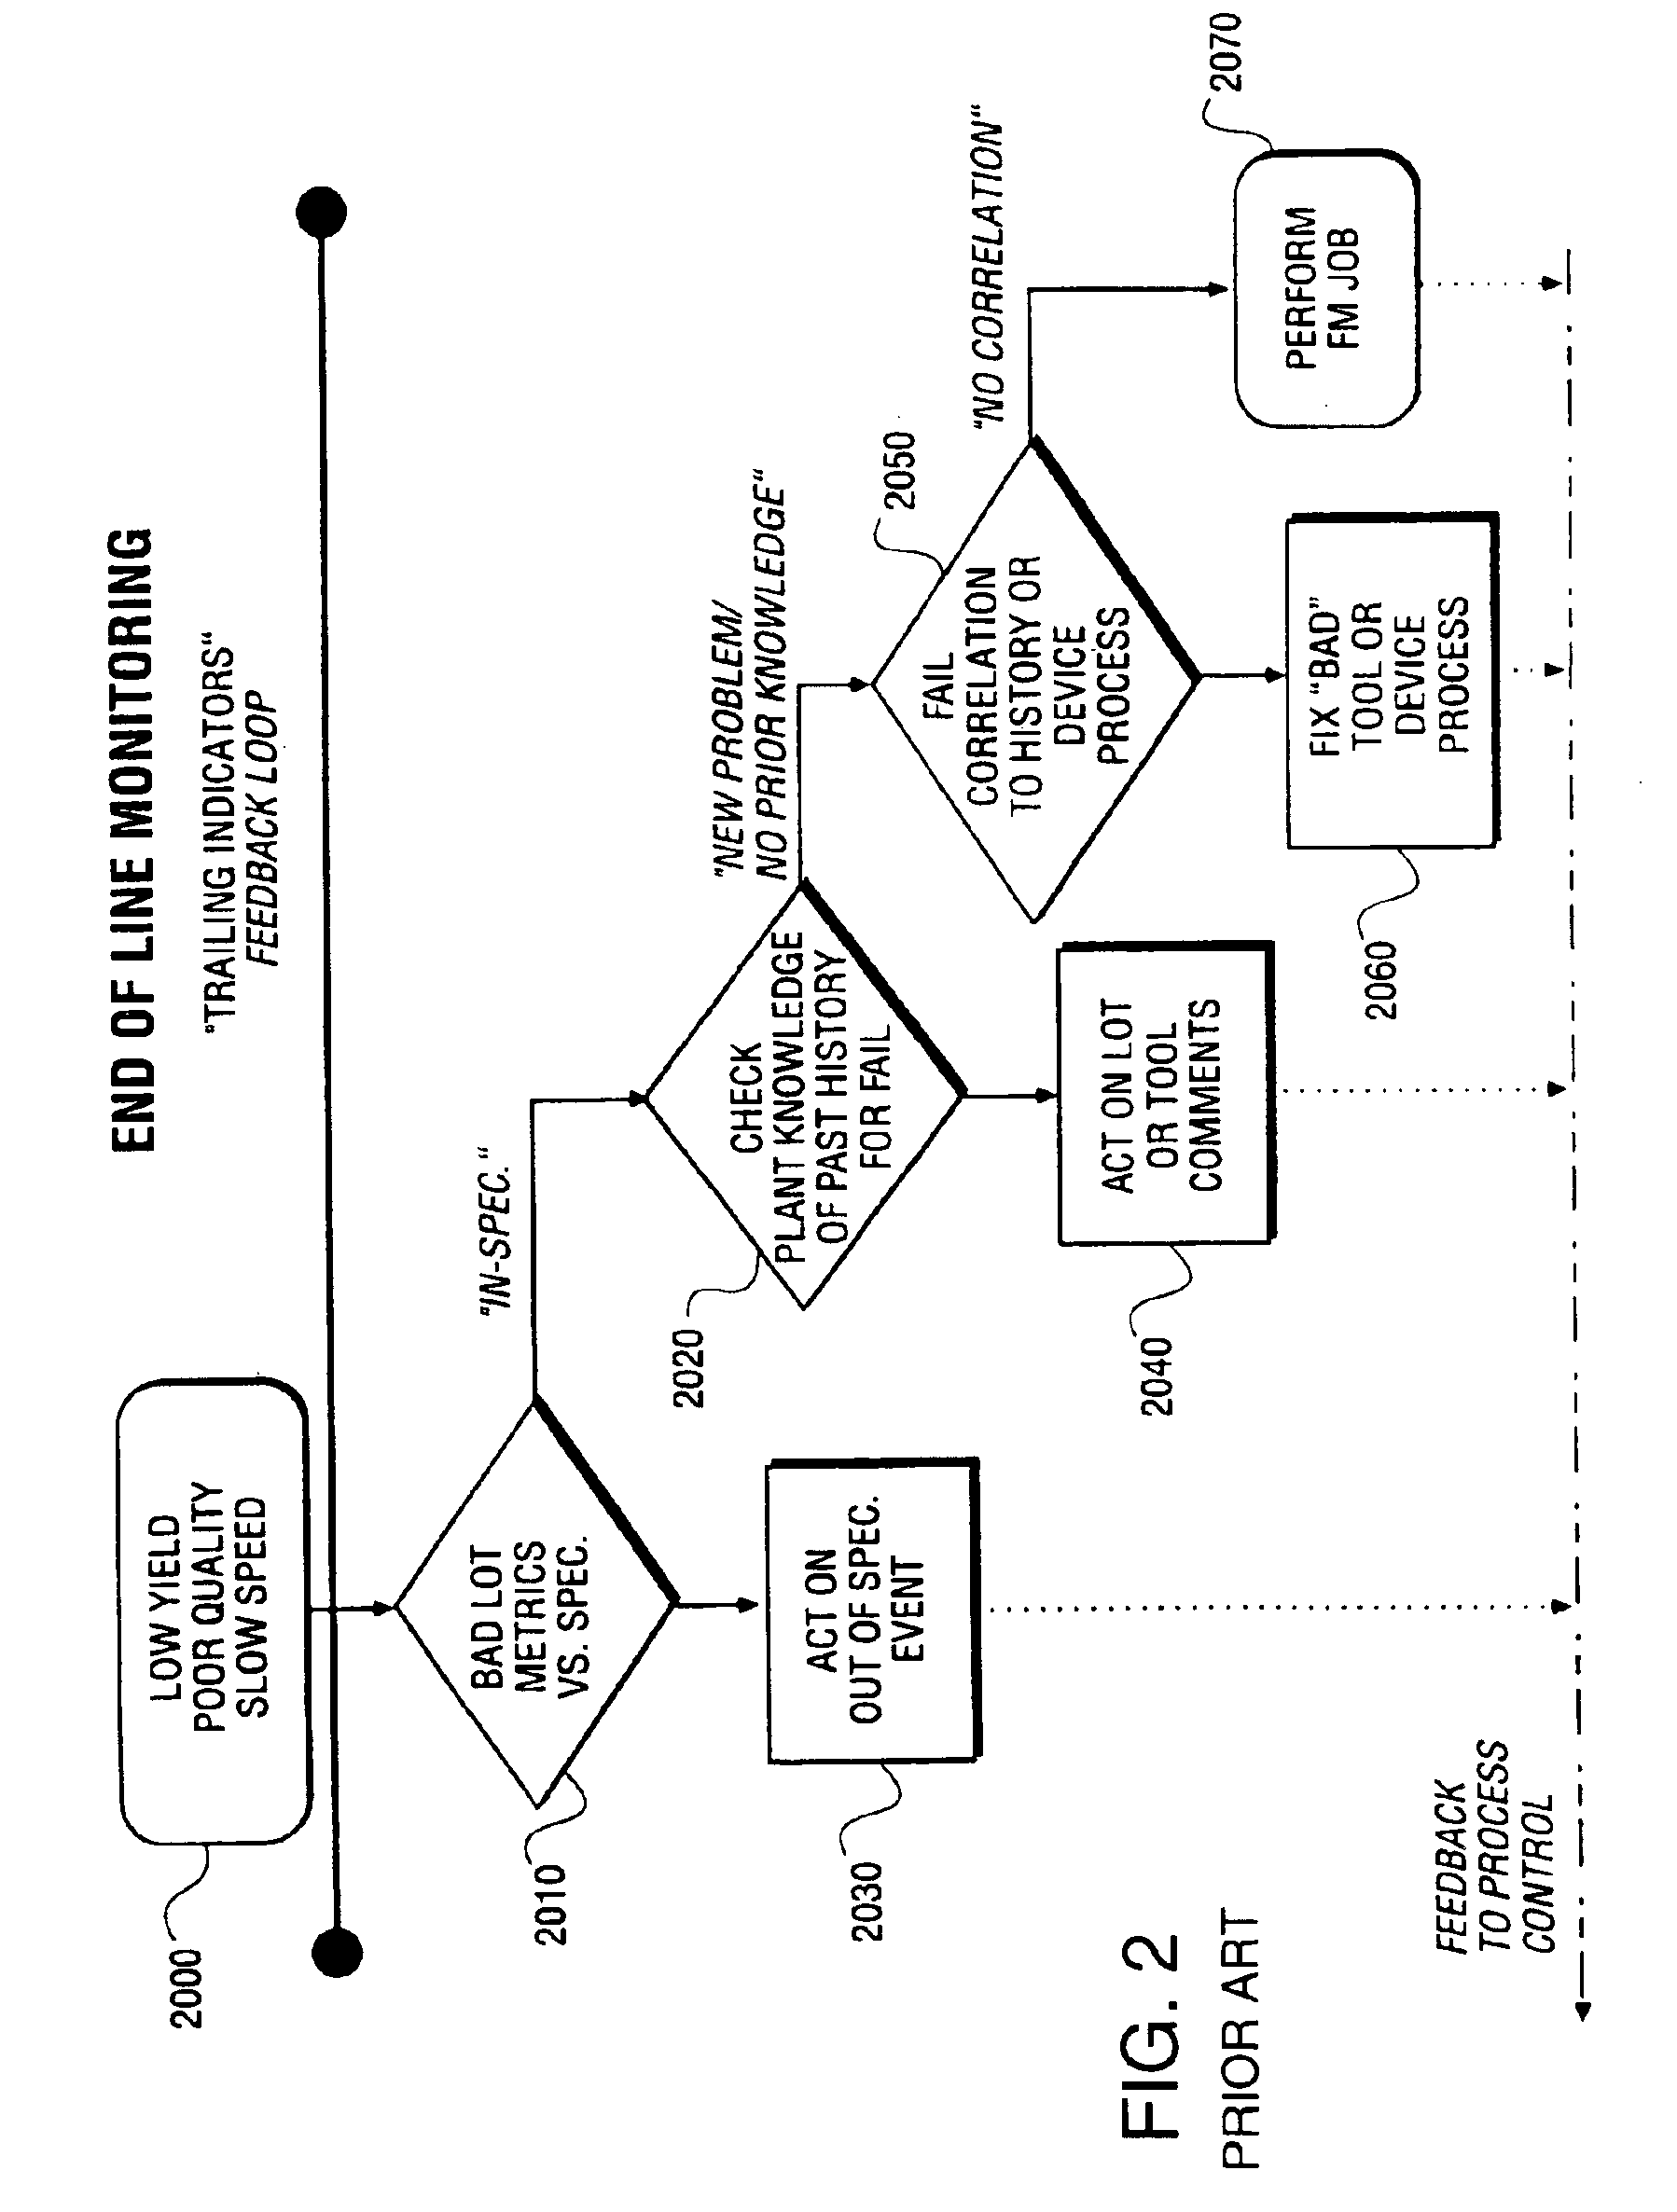 Method and apparatus for analyzing manufacturing data